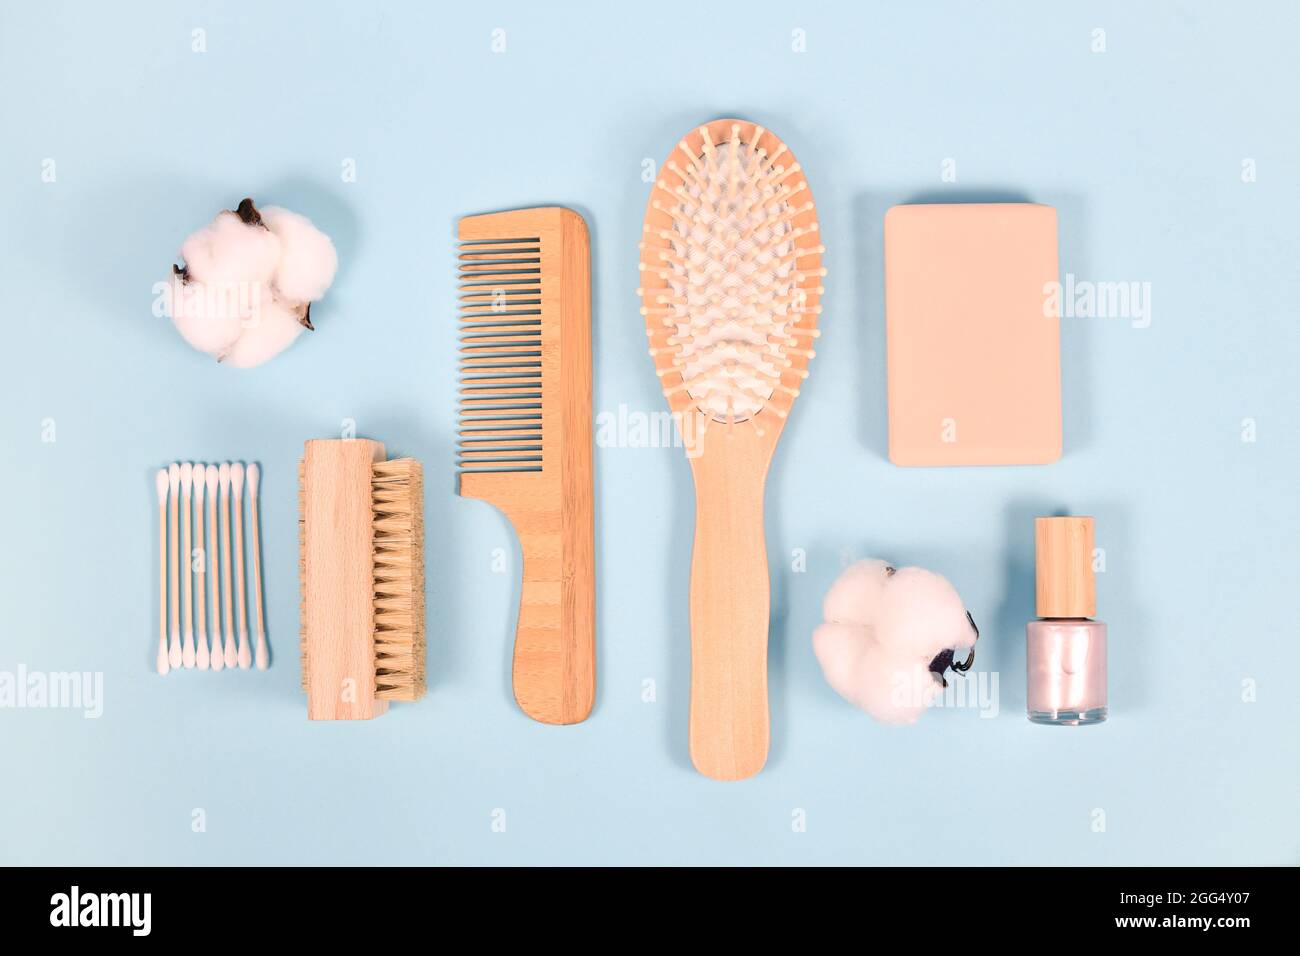 Eco friendly wooden beauty and hygiene products like comb and soap on blue background Stock Photo